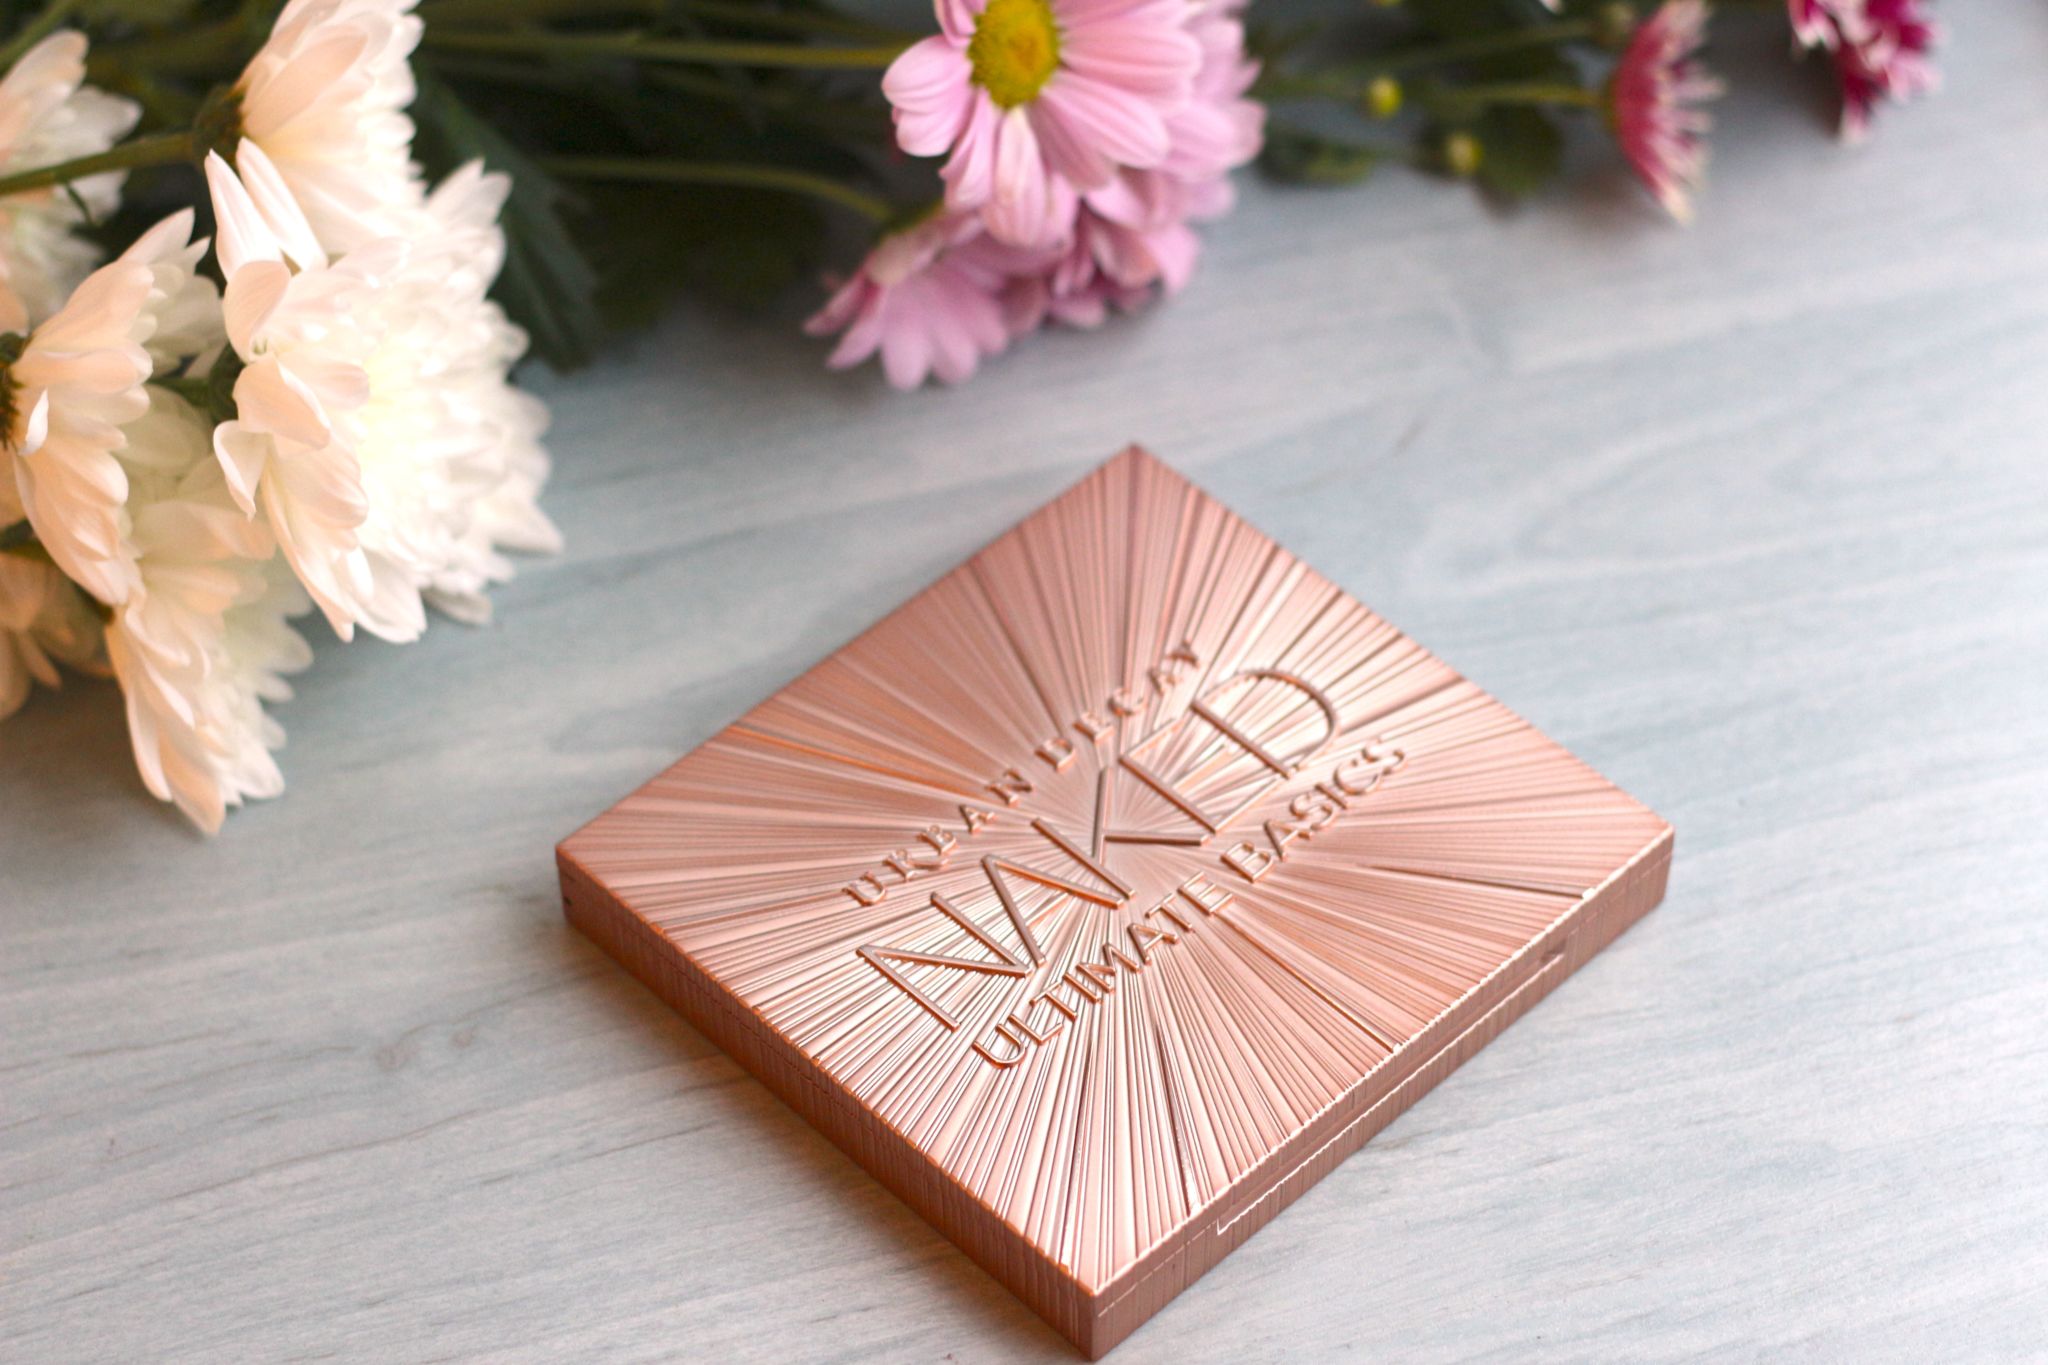 Urban Decay Naked Ultimate Basics Eyeshadow Palette Review and swatches